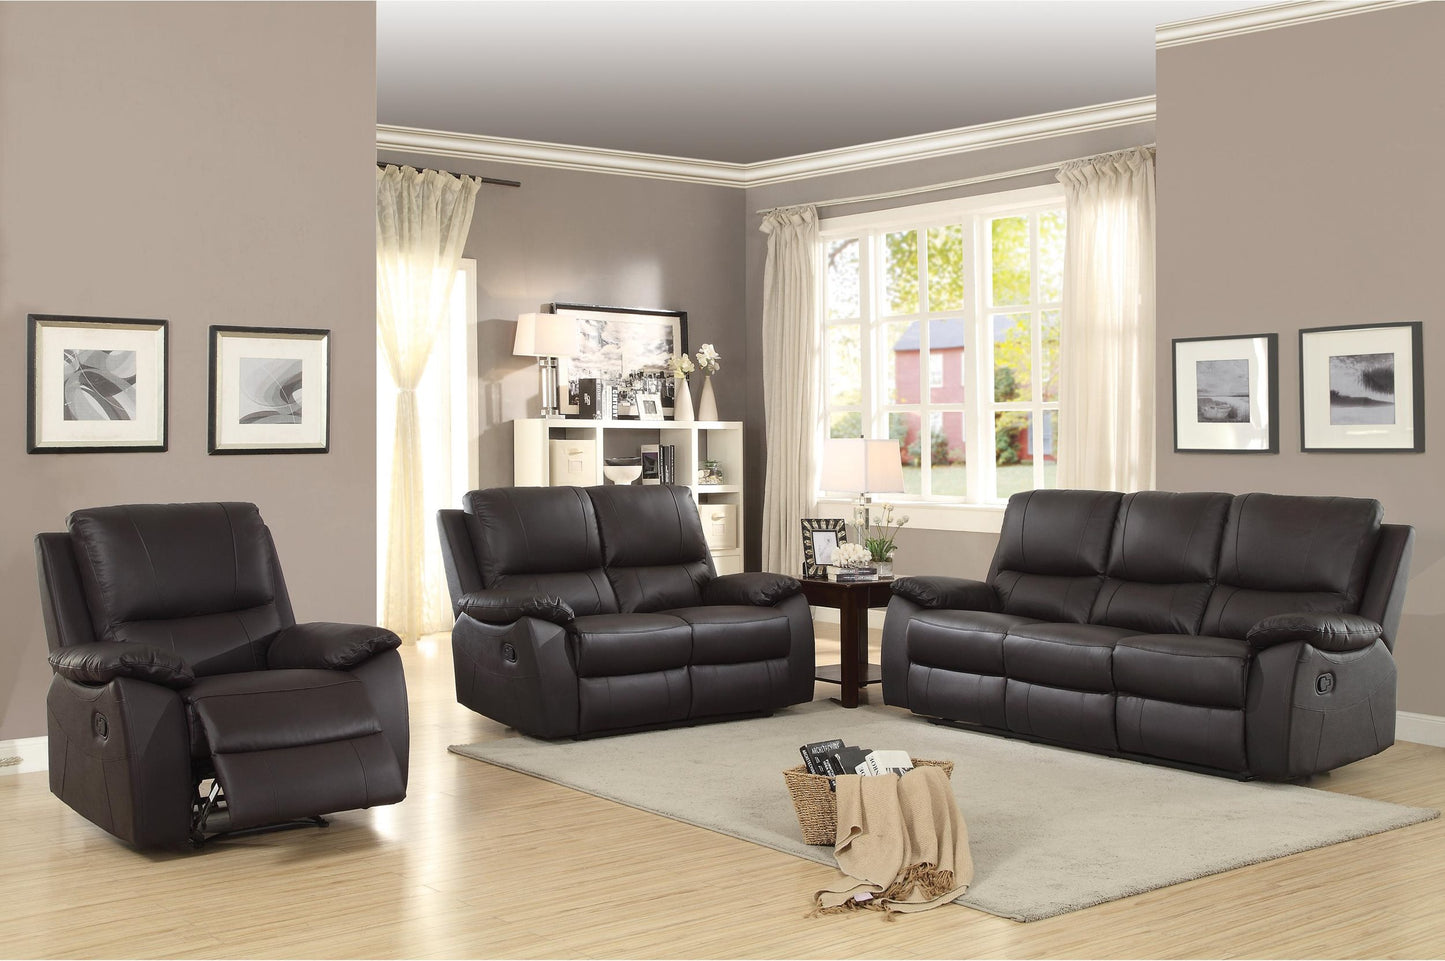 Homelegance Greeley Double Reclining Sofa in Brown Leather